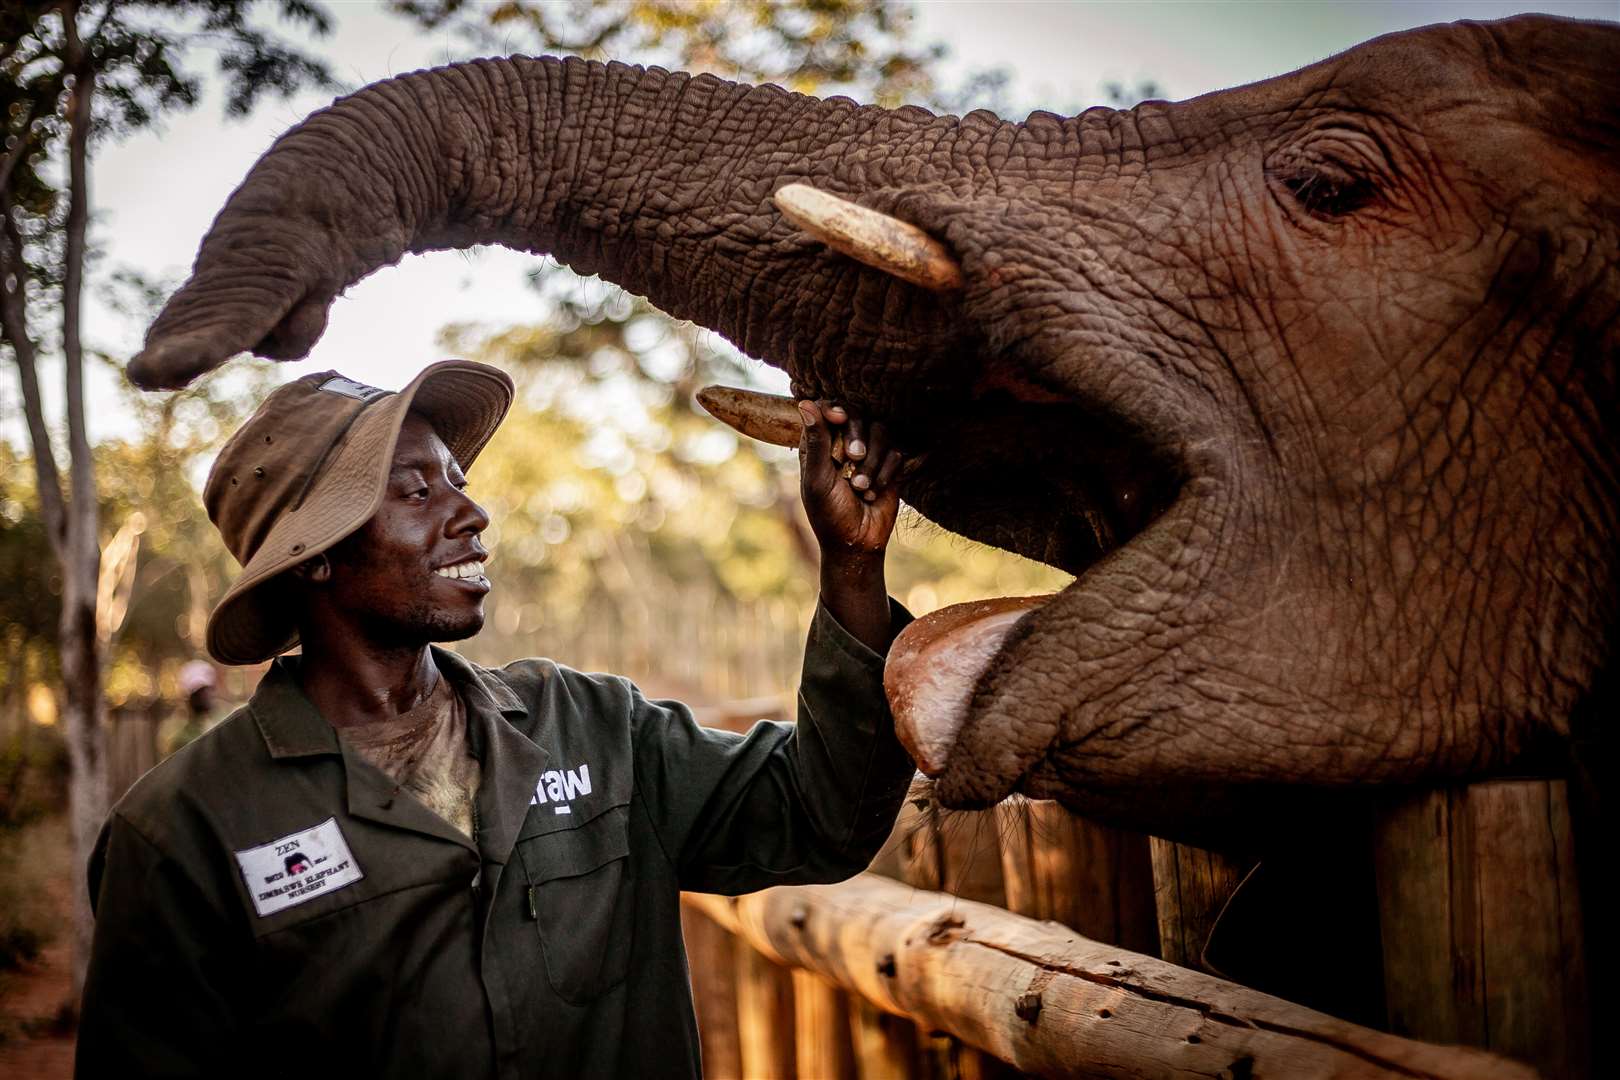 The handlers at the elephant rehabilitation project are continuing to look after their individual animals (IFAW/Lesanne Dunlop/PA)